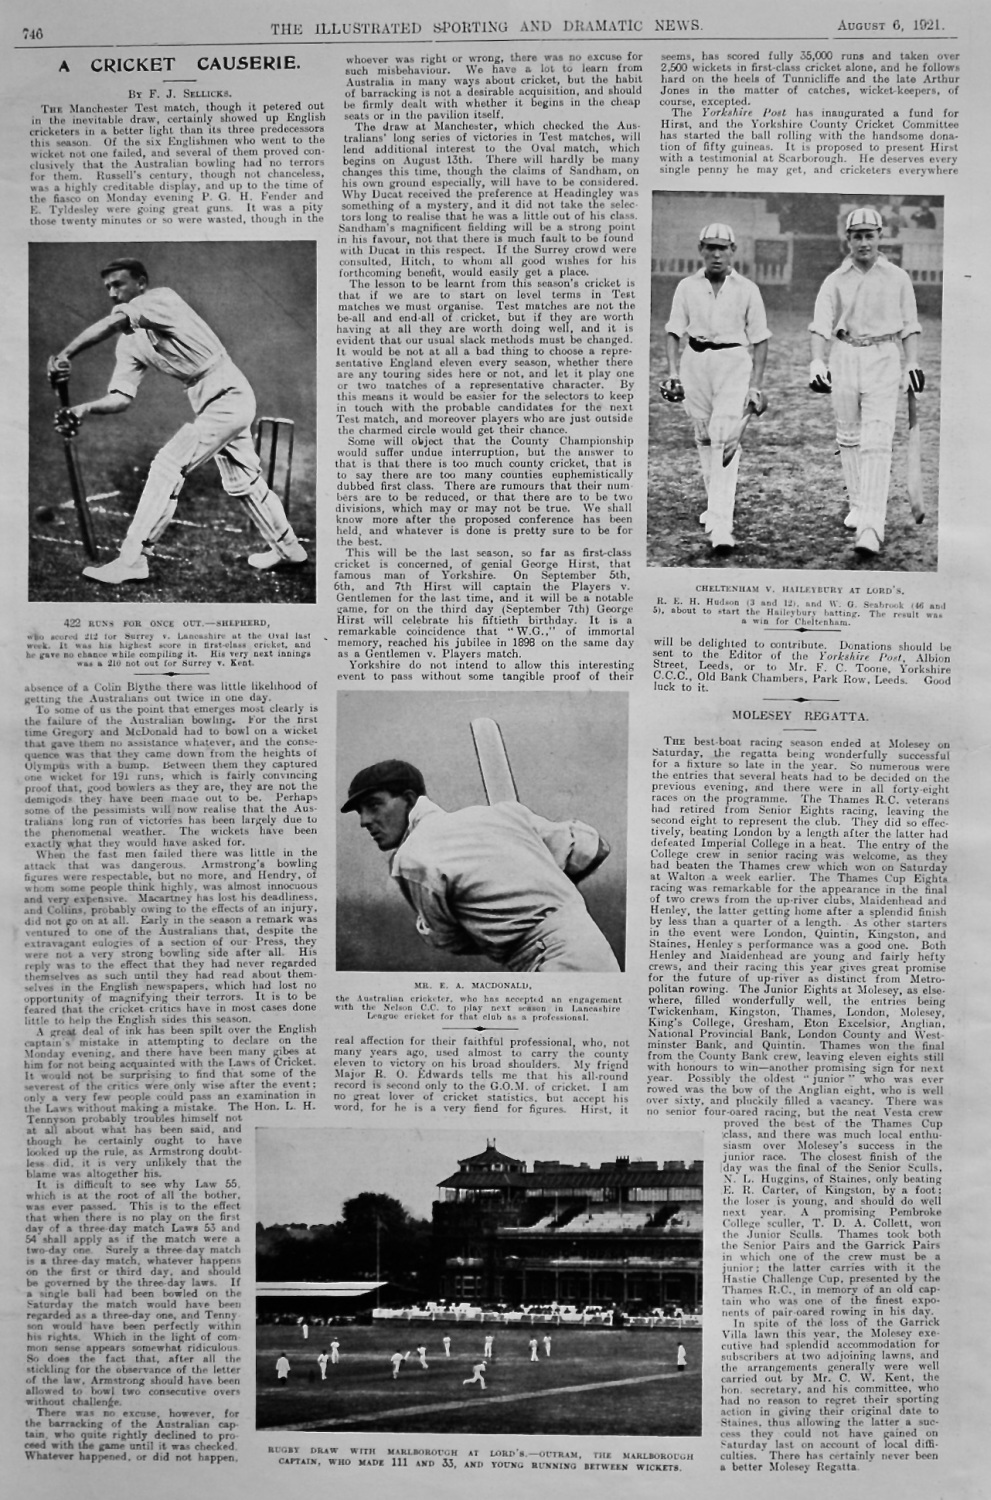 A Cricket Causerie.  August 6th, 1921.